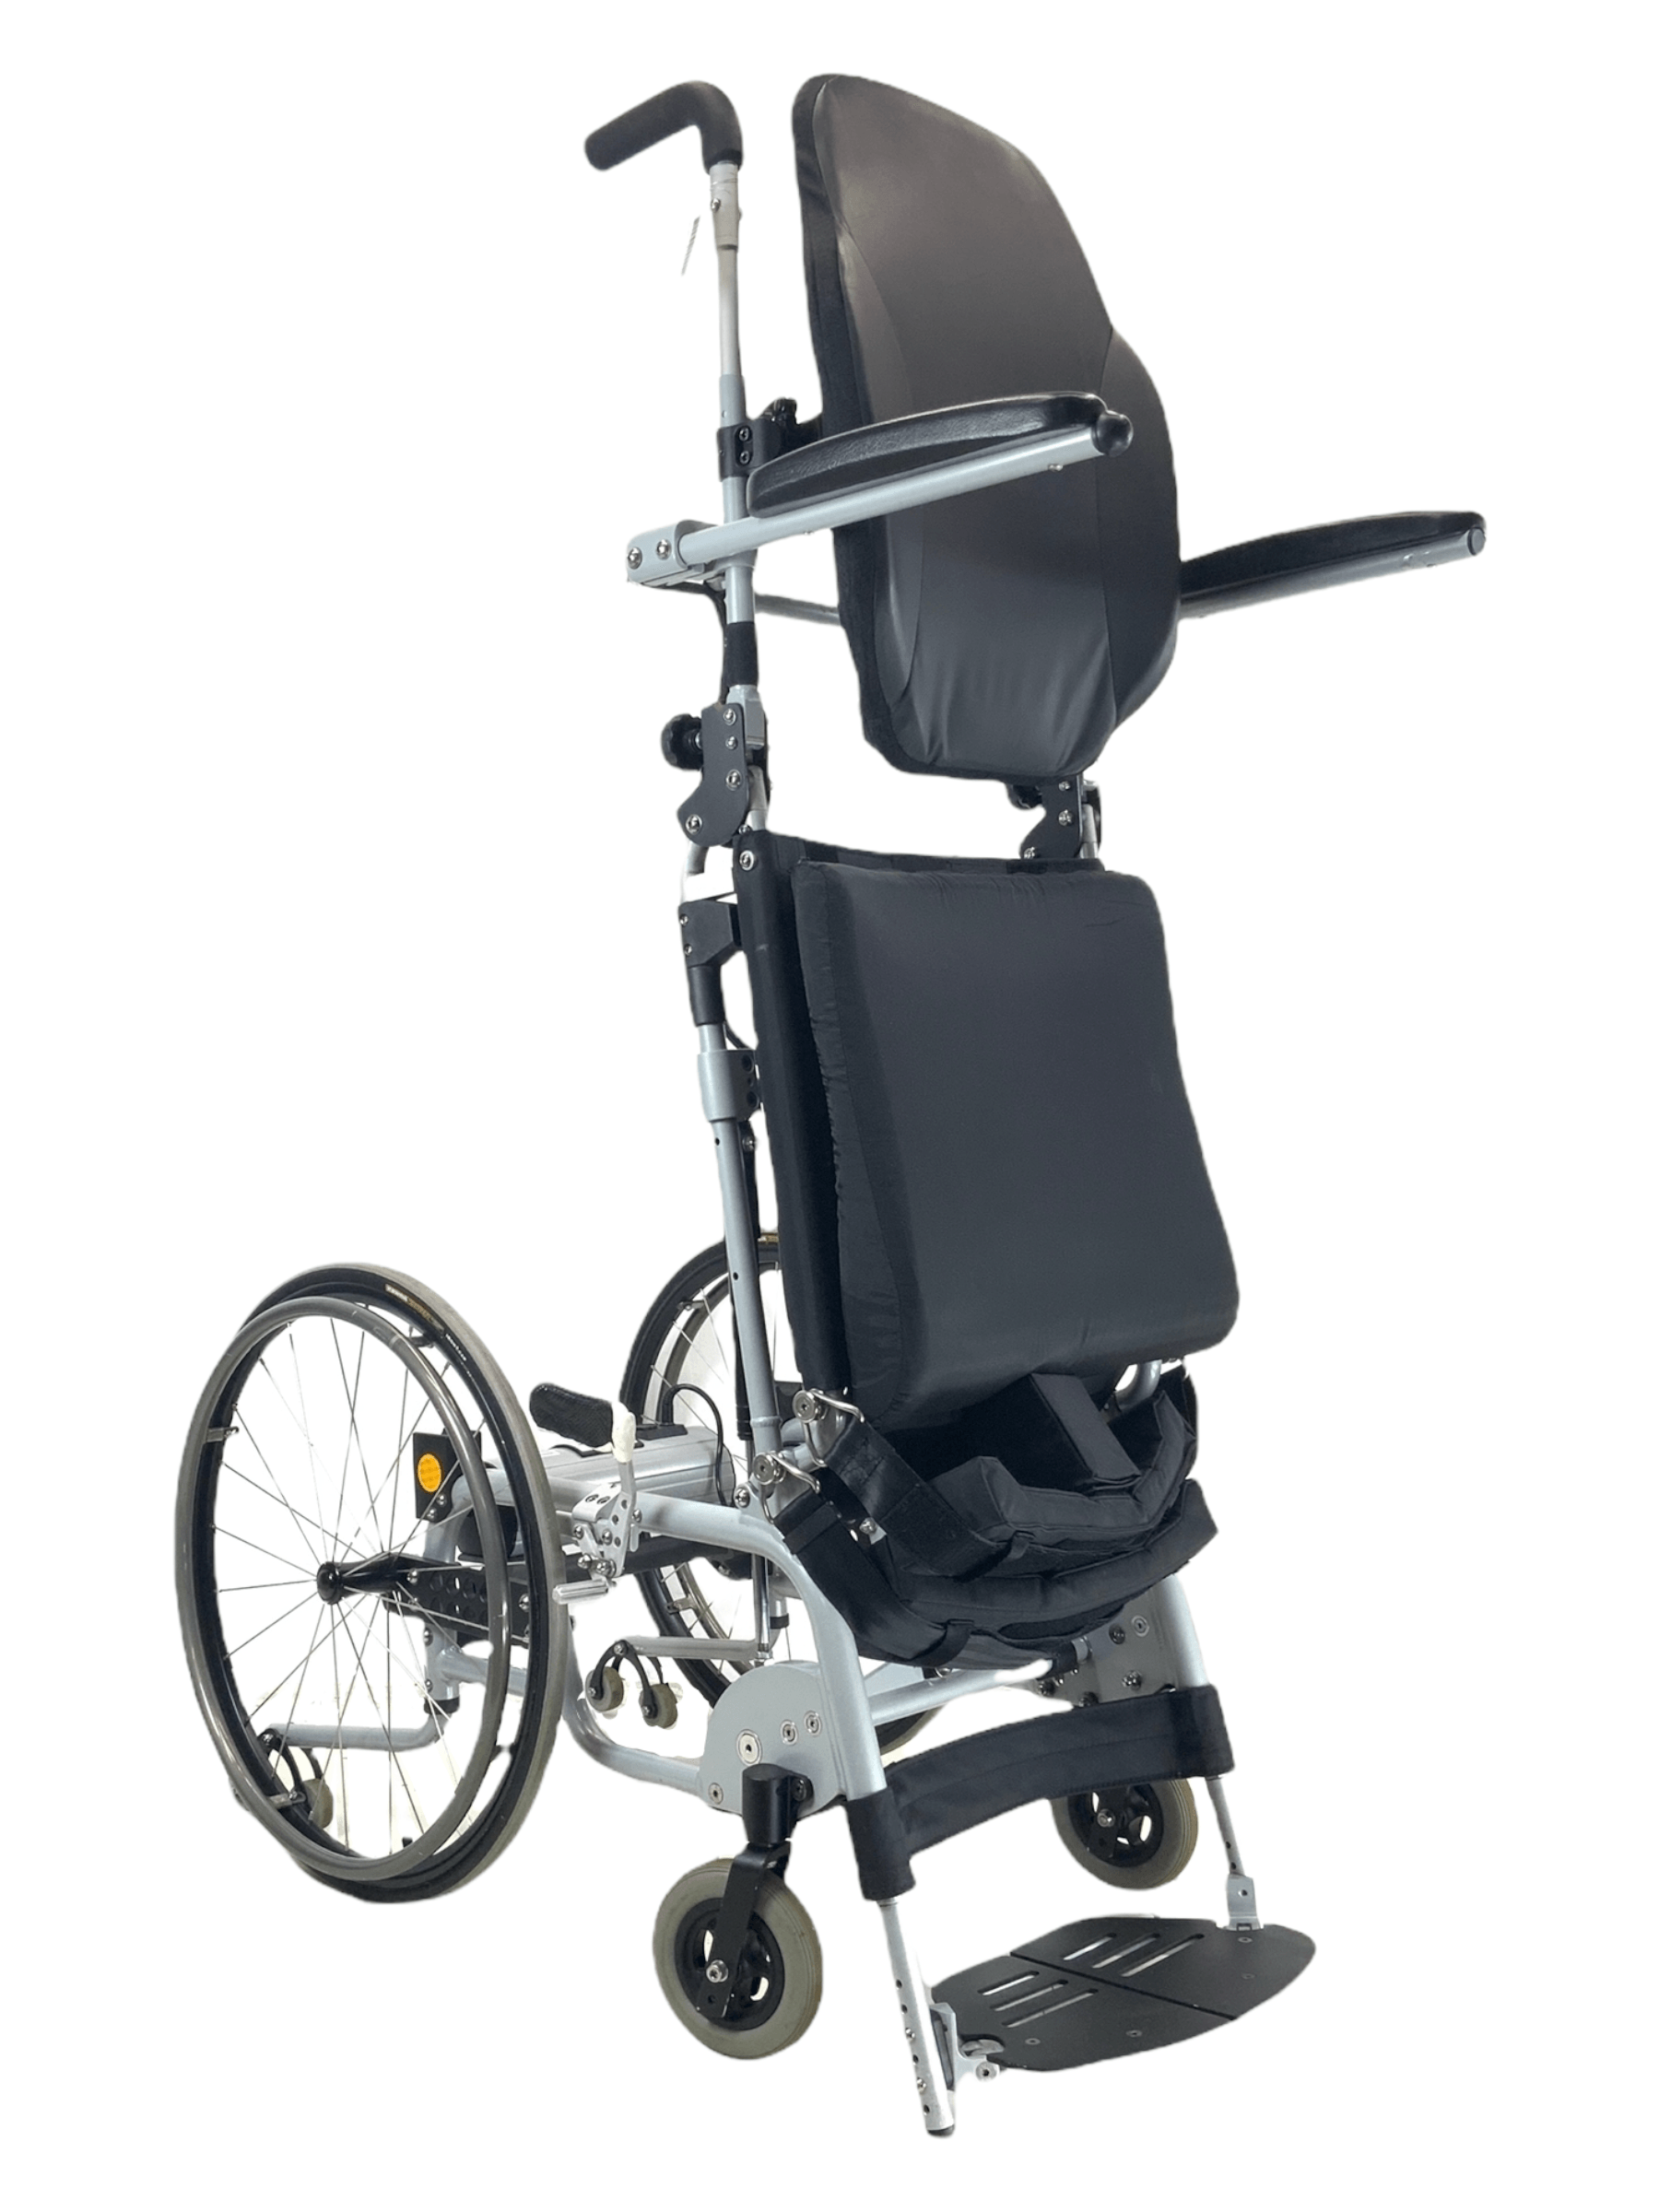 How Much Does a Manual Wheelchair Weigh? - Weight of Manual Chairs